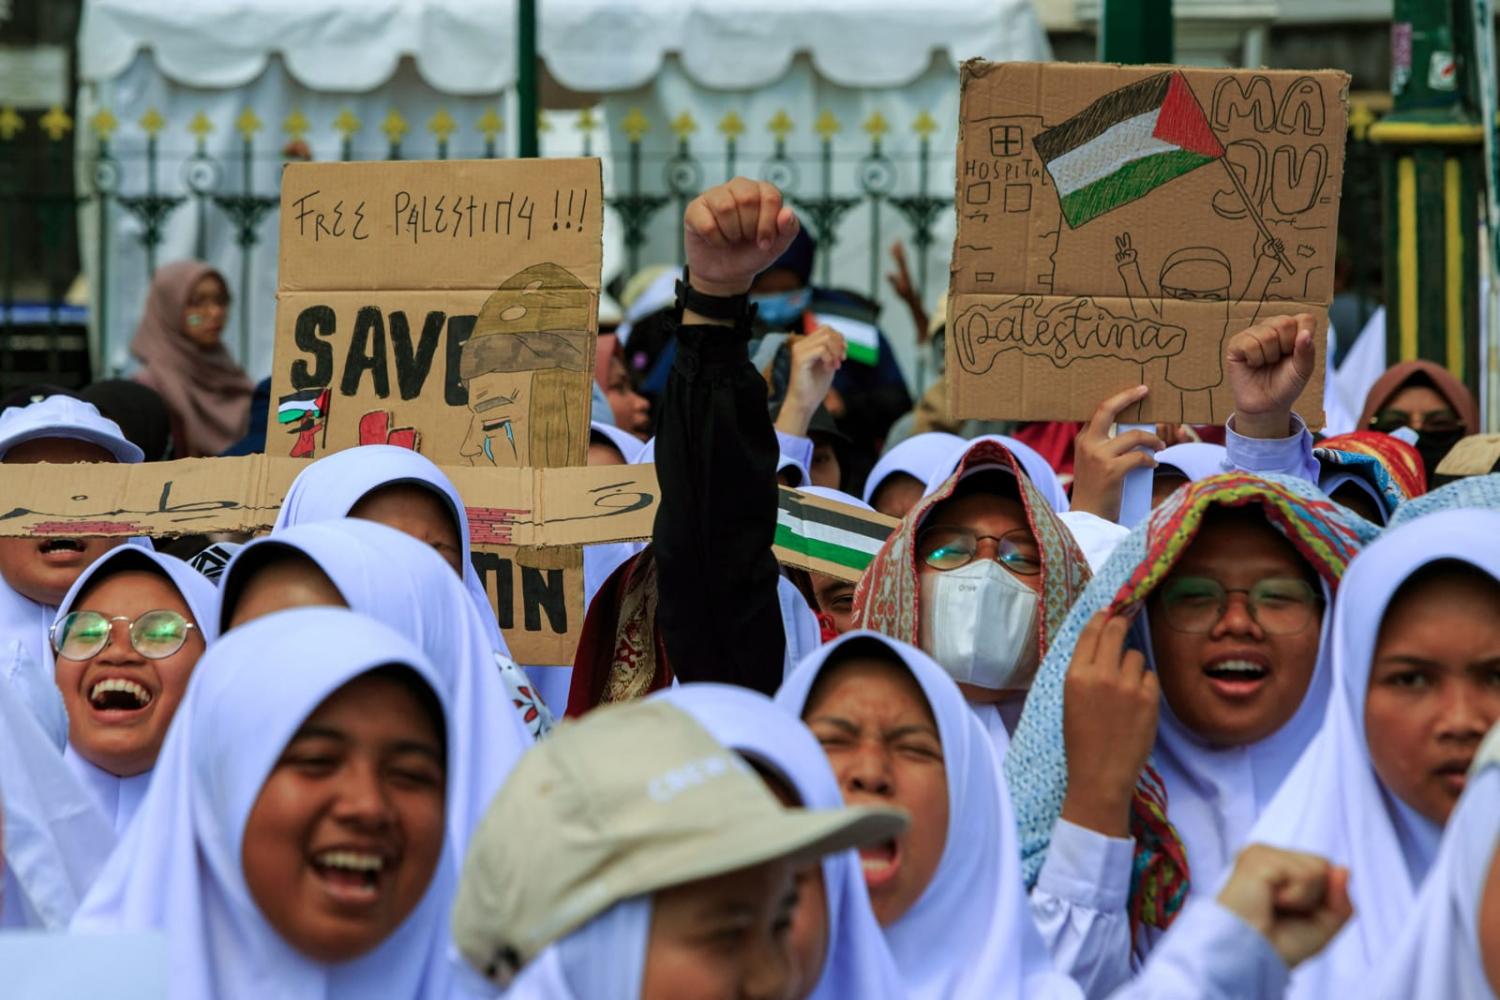 Demonstrators during a pro-Palestinian rally in Yogyakarta, Indonesia, on 13 October (Devi Rahman/AFP via Getty Images)